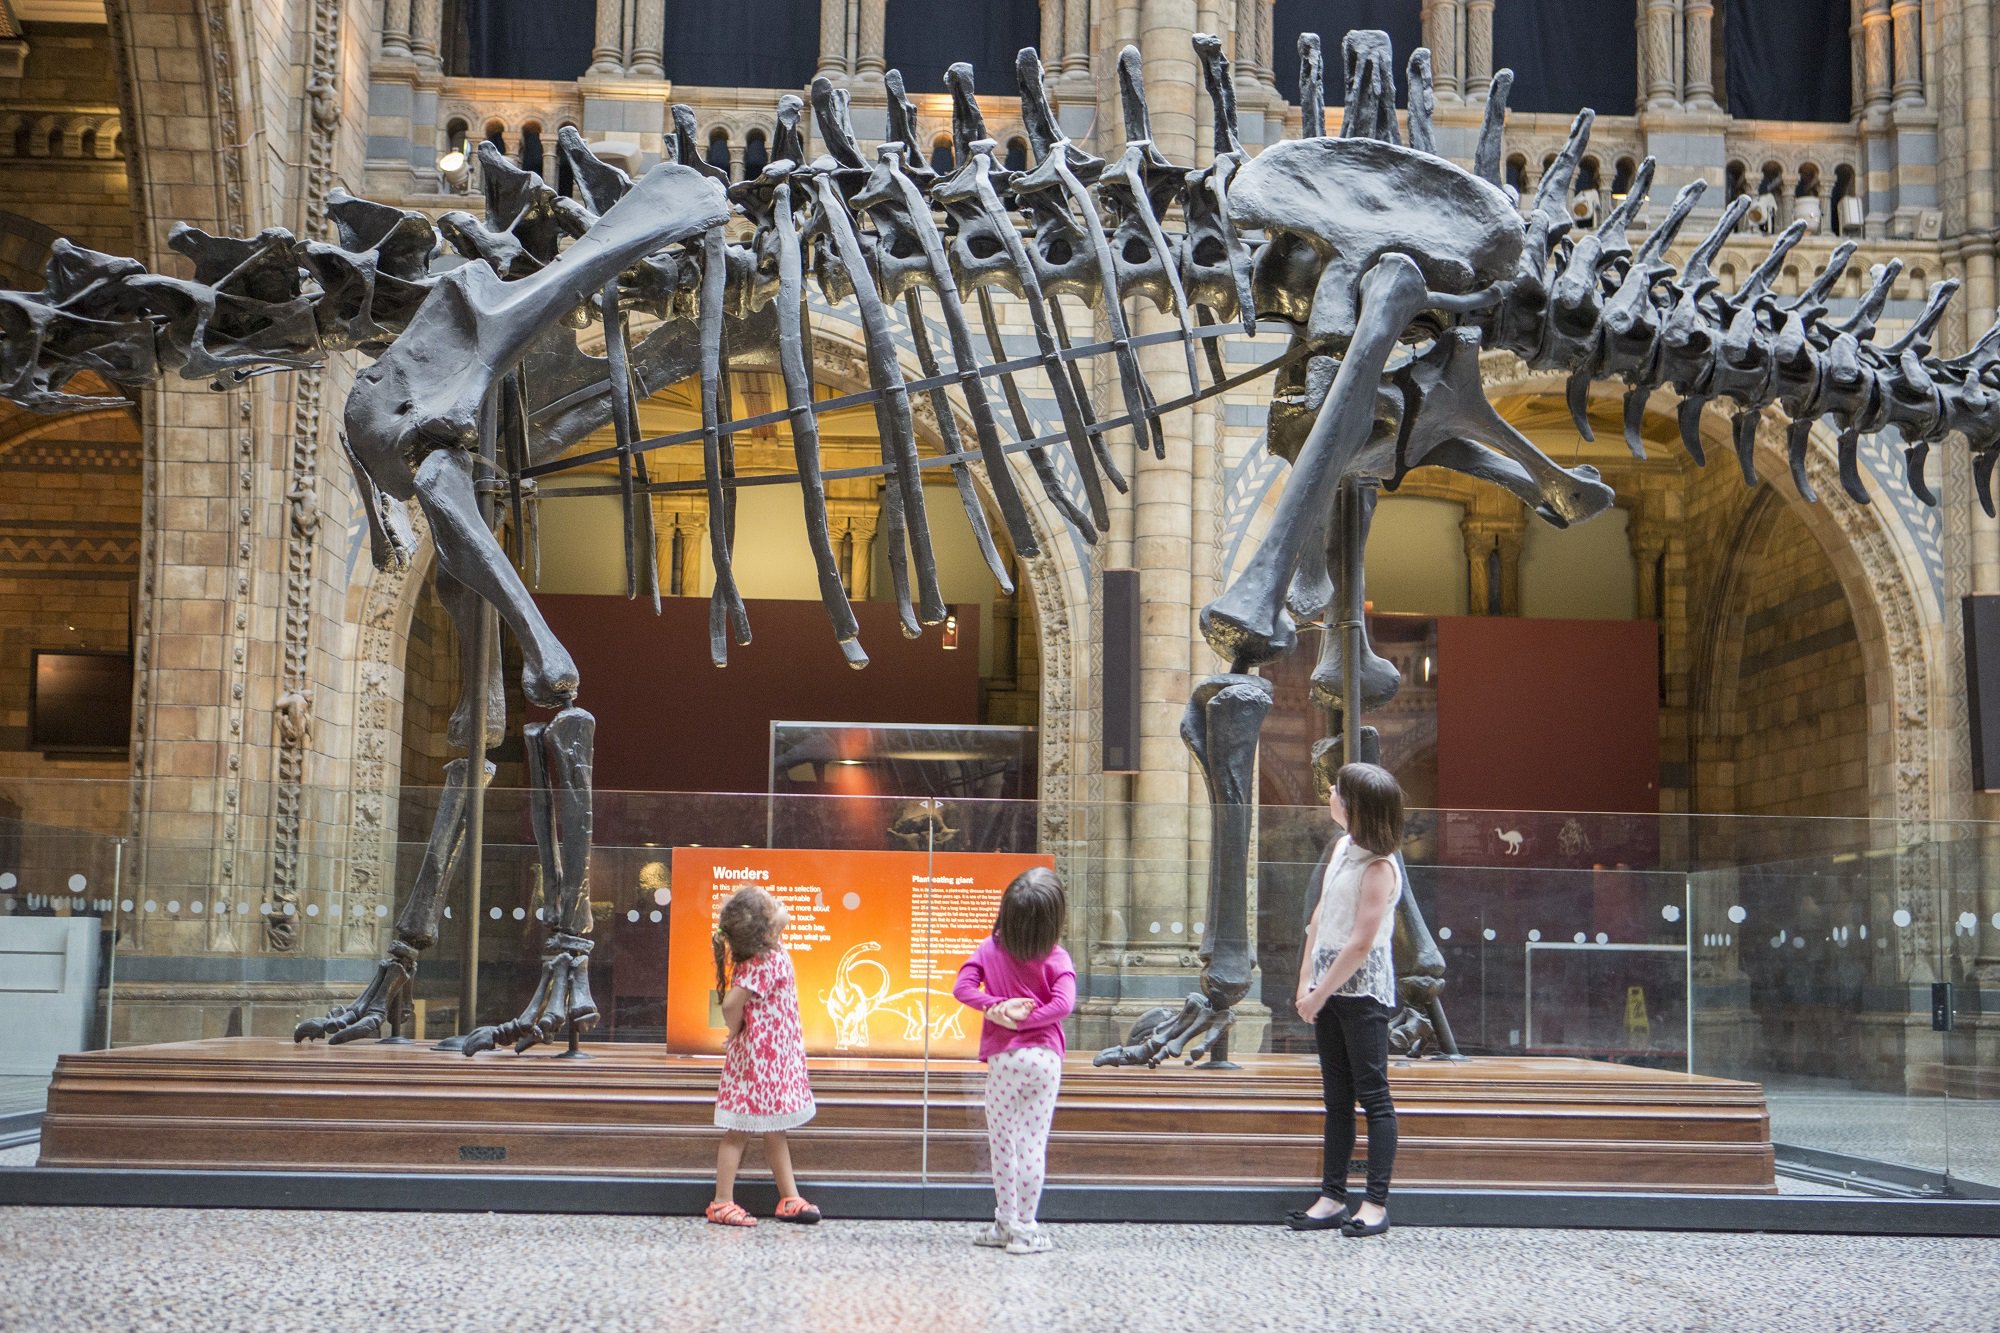 Children with the Diplodocus exhibit at the Natural History Museum, London